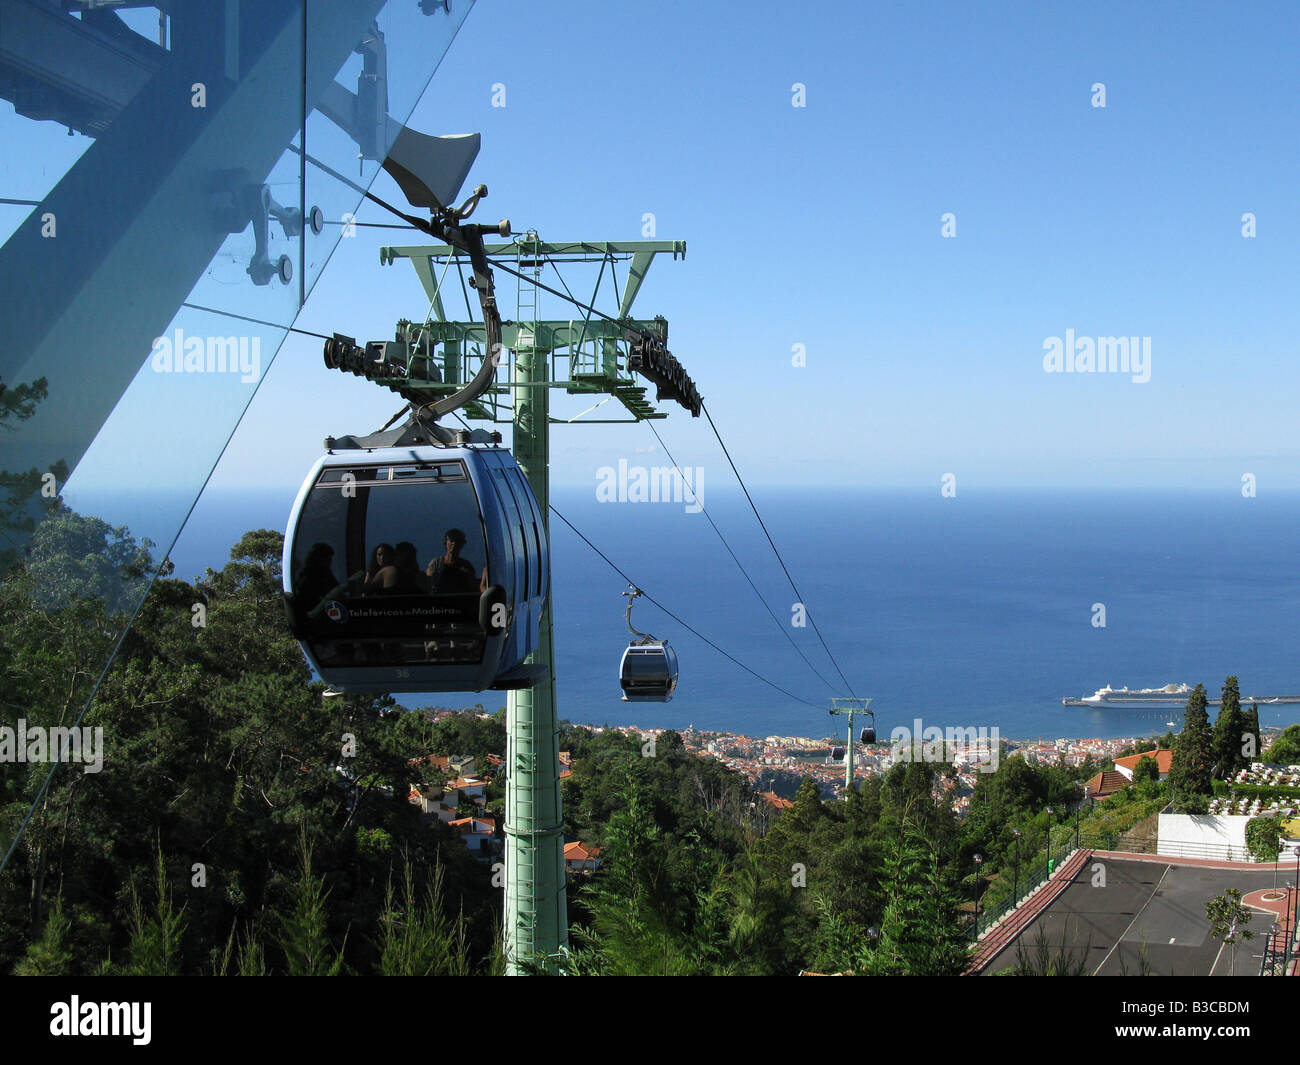 Cable car that connects Funchal to Monte on the Portuguese island of Madeira. P&O ship Ventura in the distance. Funchal, Madeira, Portugal, Europe Stock Photo